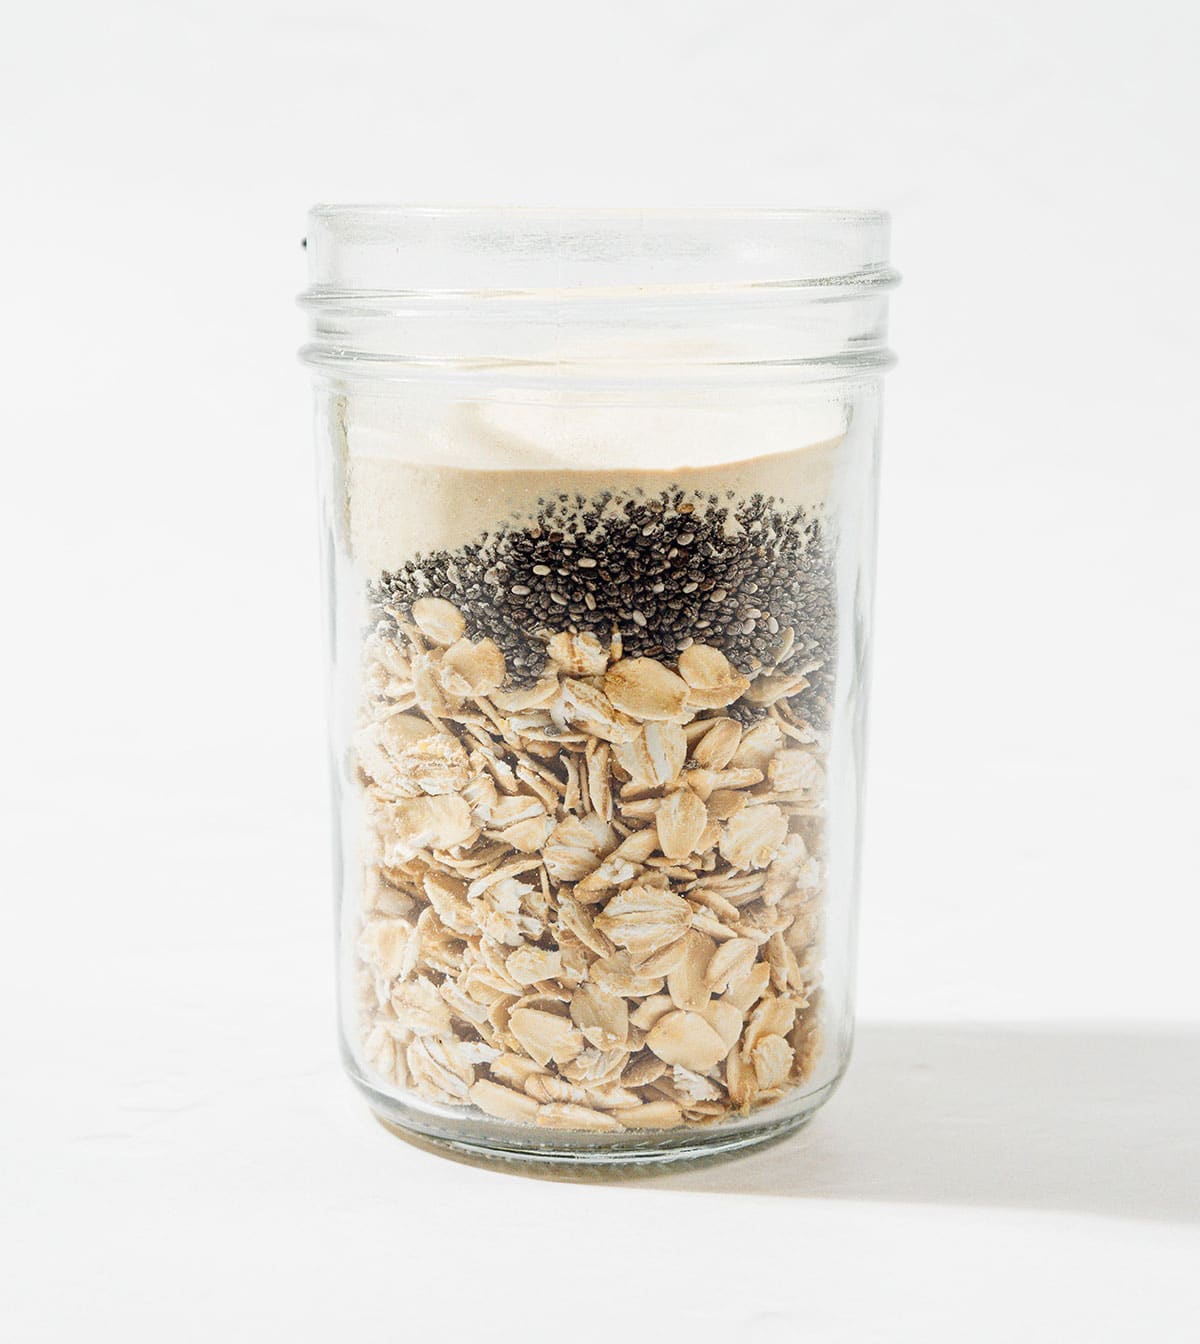 Ingredients for protein overnight oats in a jar.